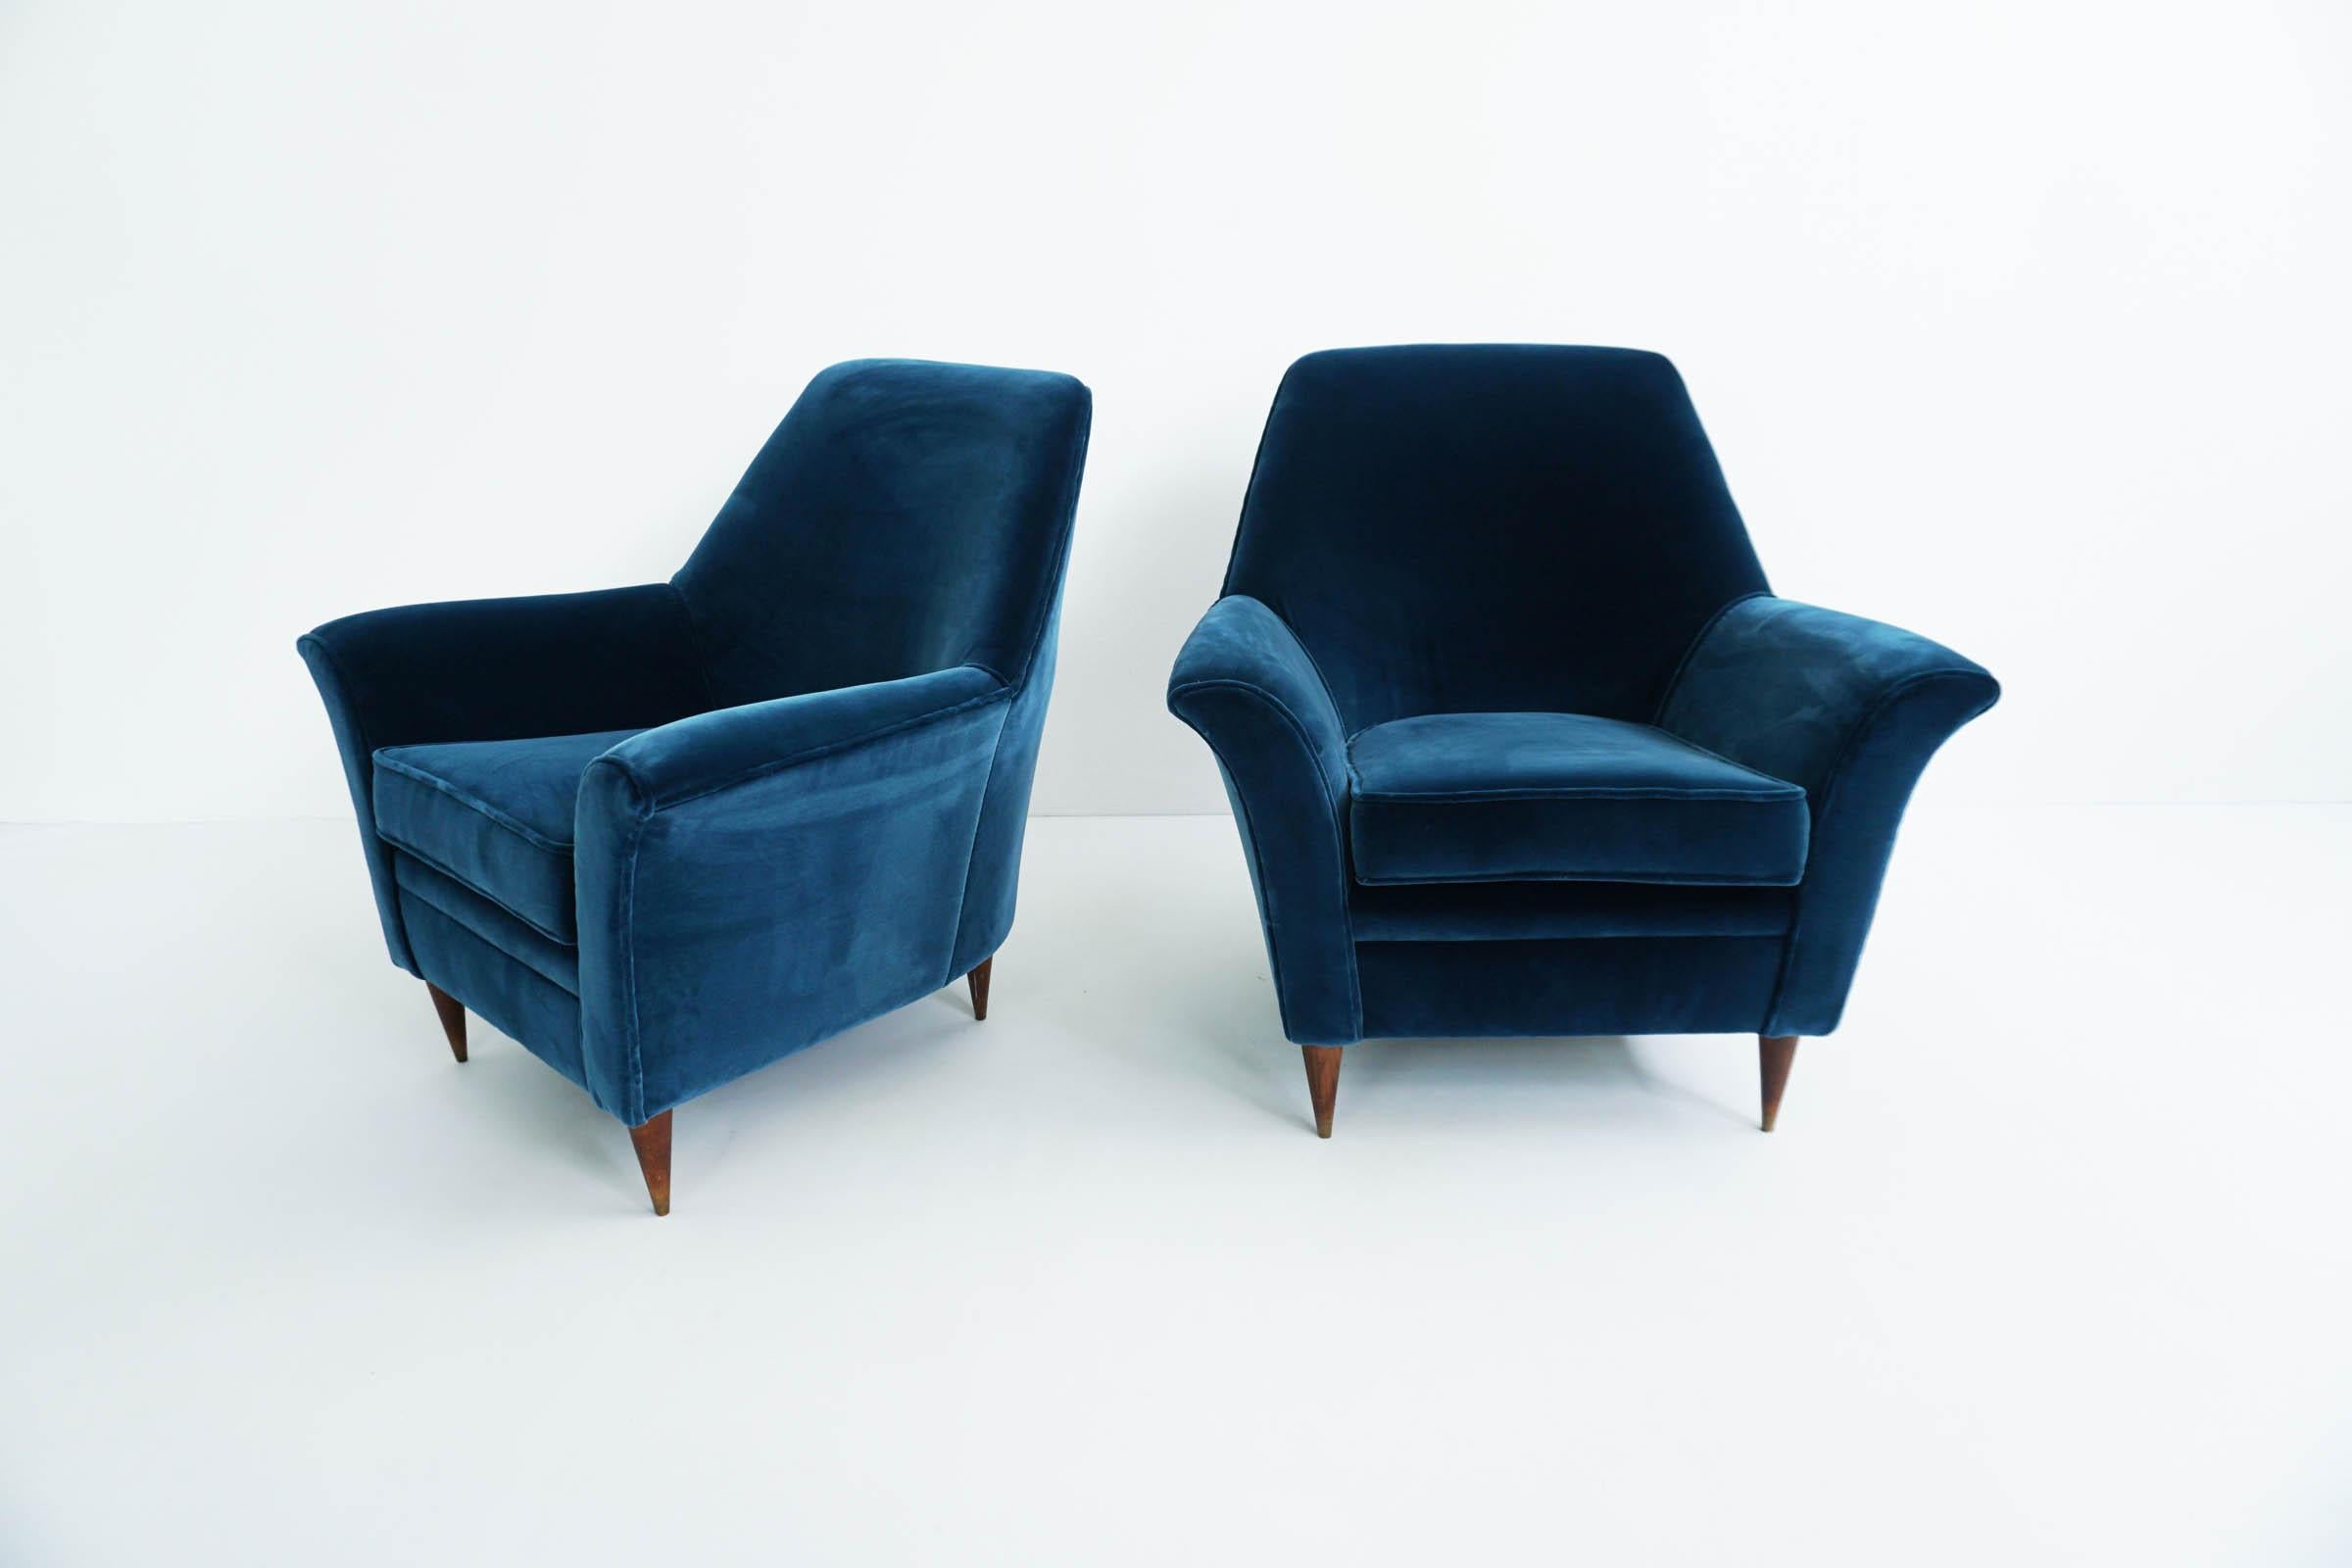 Rare pair of lounge chairs by Ico Parisi. 
Great lounge chairs, fully upholstered in sexy blue lagoon velvet. 
Produced by Ariberto Colombo, Cantù, Italy.